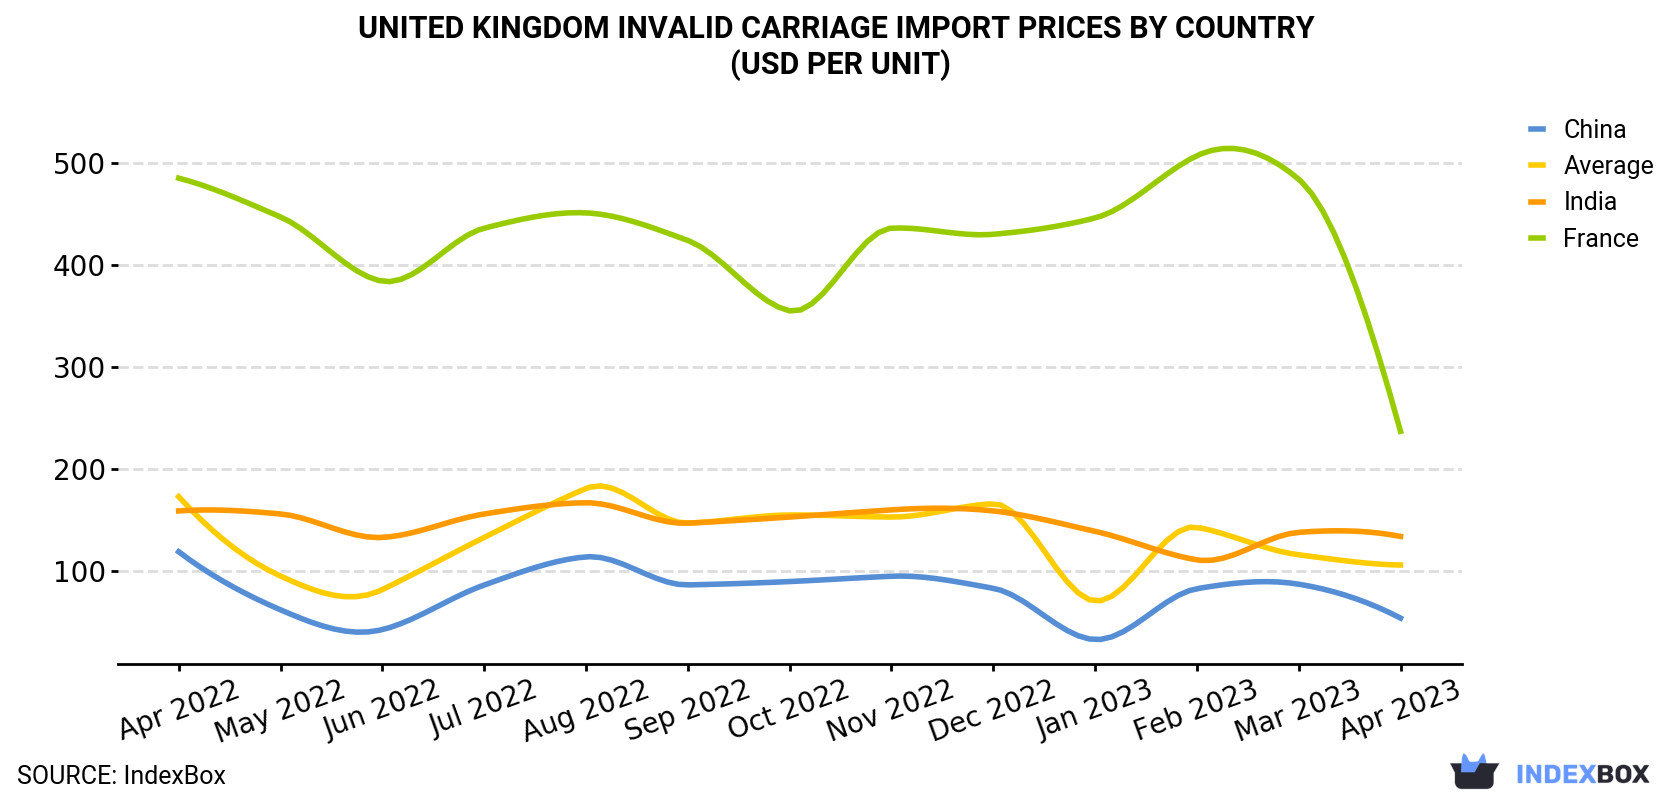 United Kingdom Invalid Carriage Import Prices By Country (USD Per Unit)